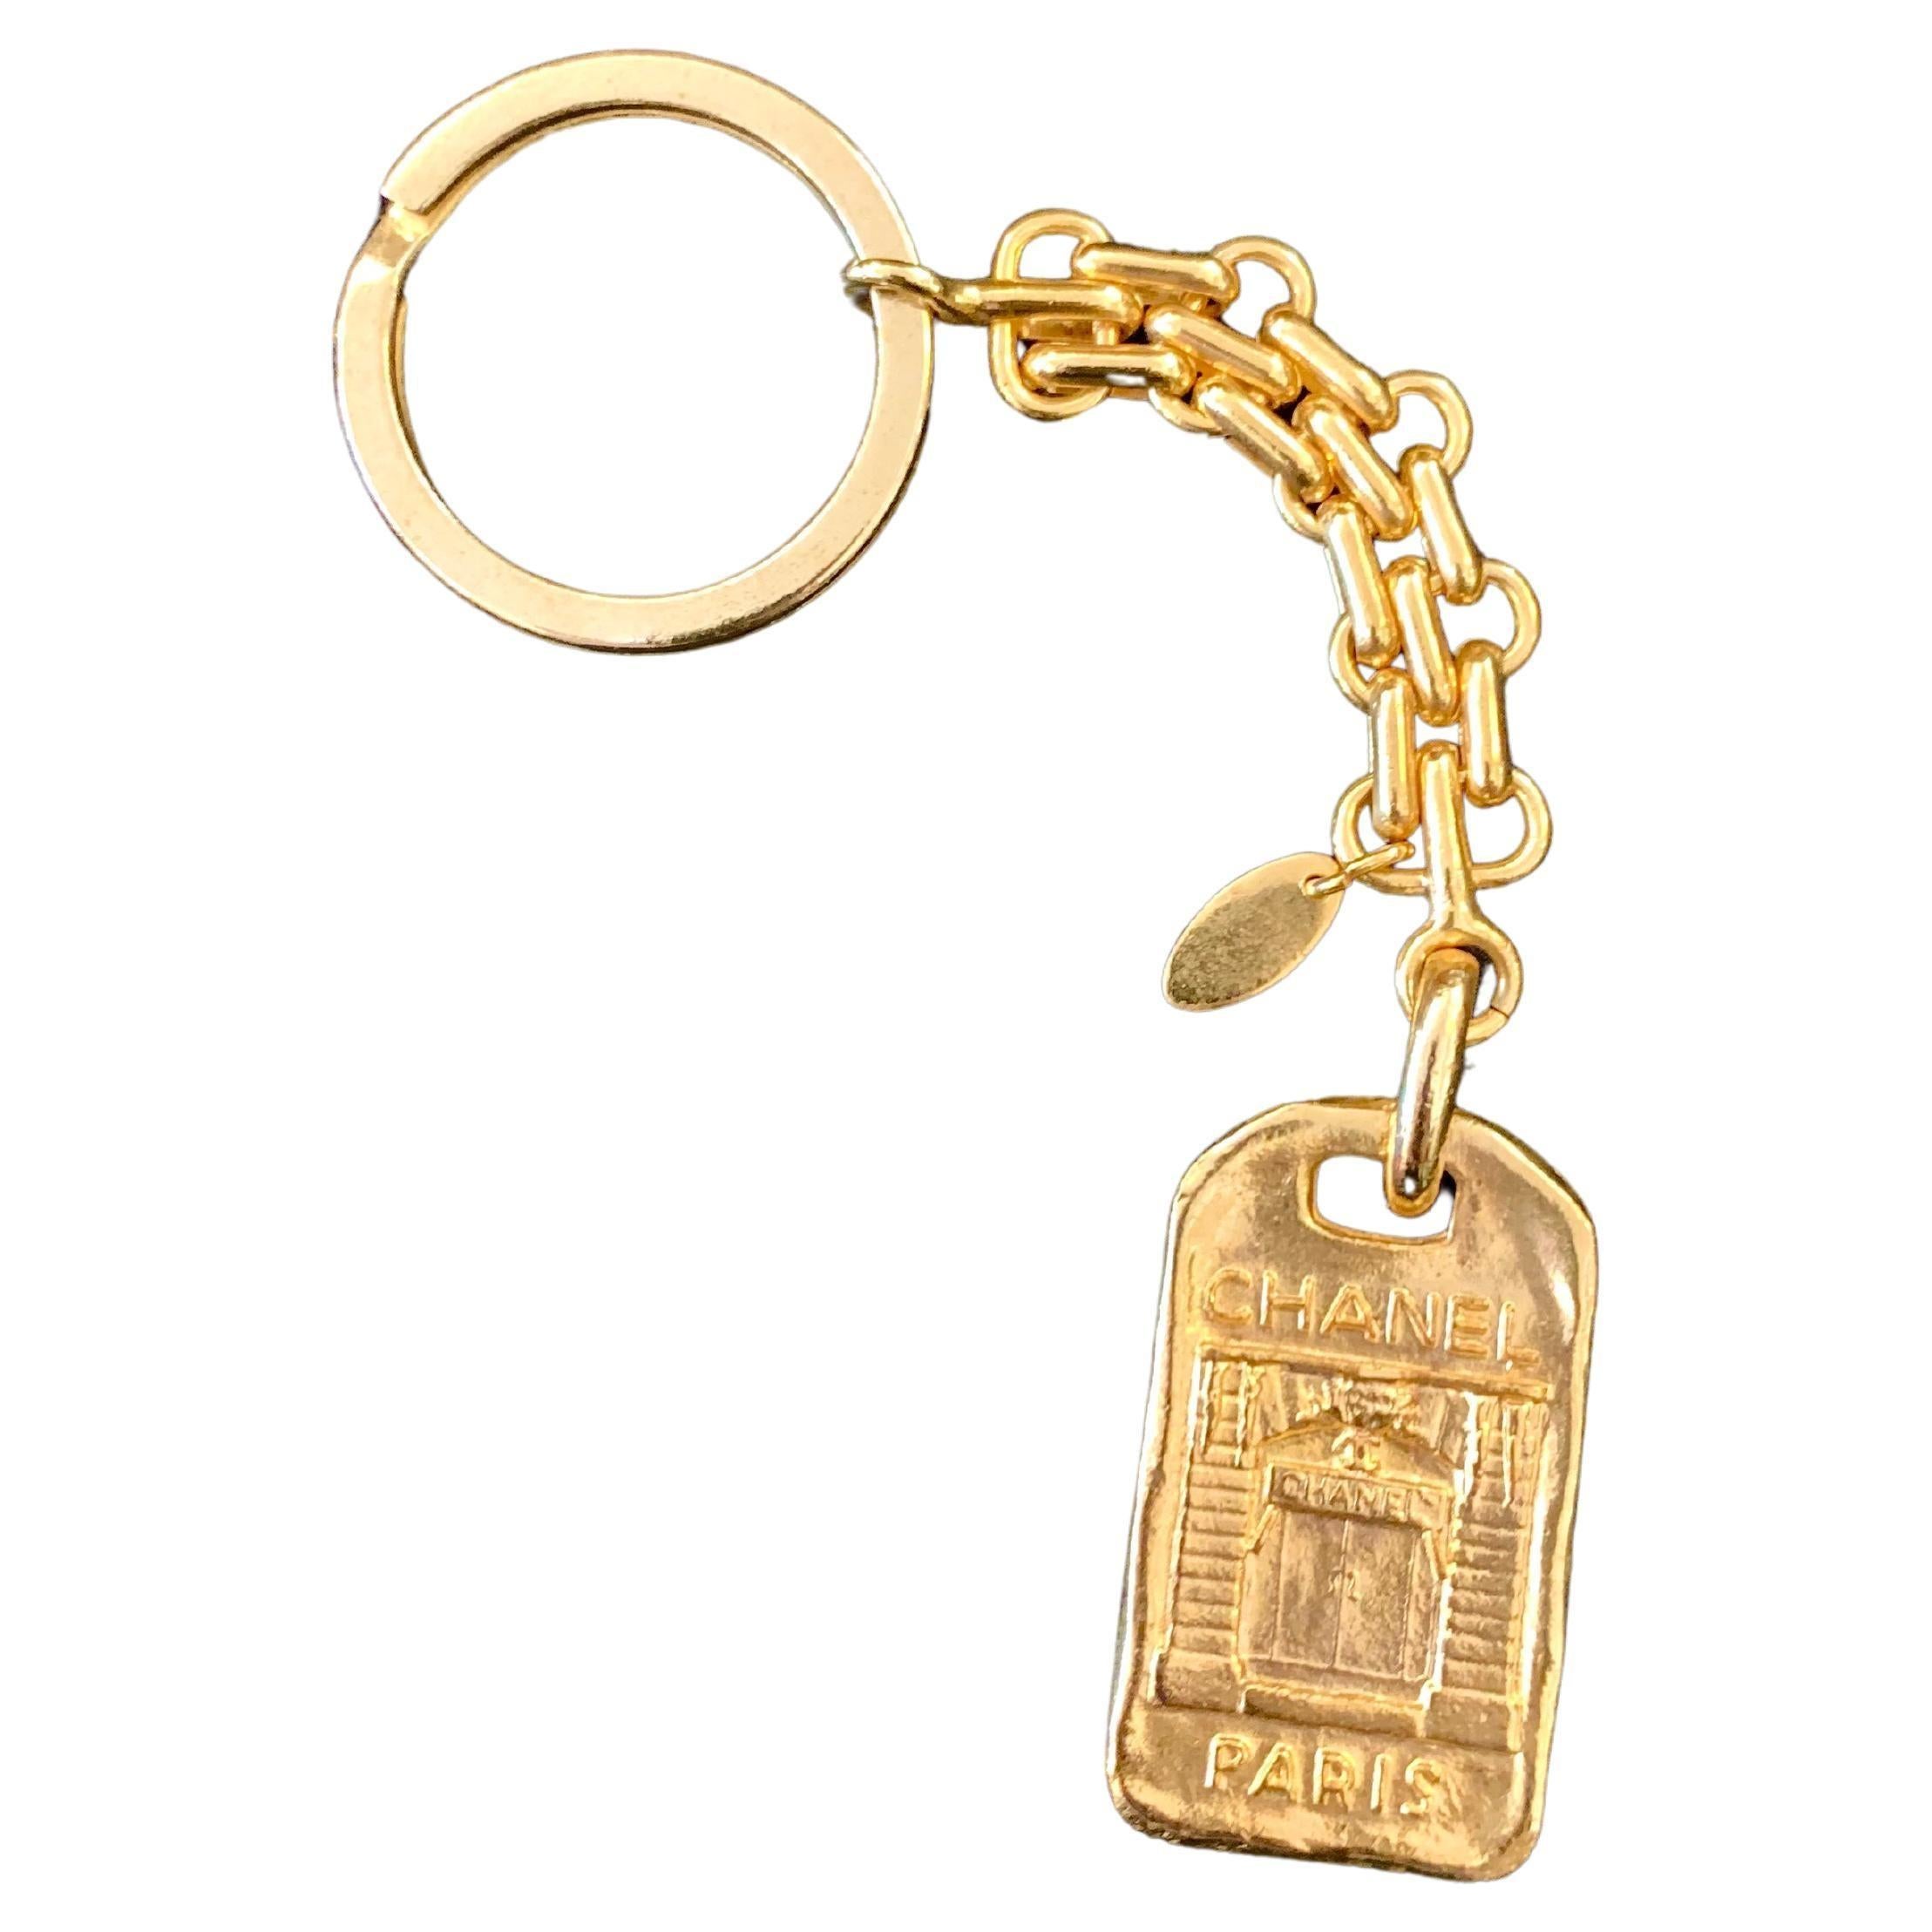 This vintage CHANEL key chain is crafted of gold toned metal featuring gold chain links with a key ring and a Chanel Paris front door charm plate. Stamped CHANEL Made in France. Length measures approximately 14 cm Charm 4.0 x 2.4 cm. Comes with